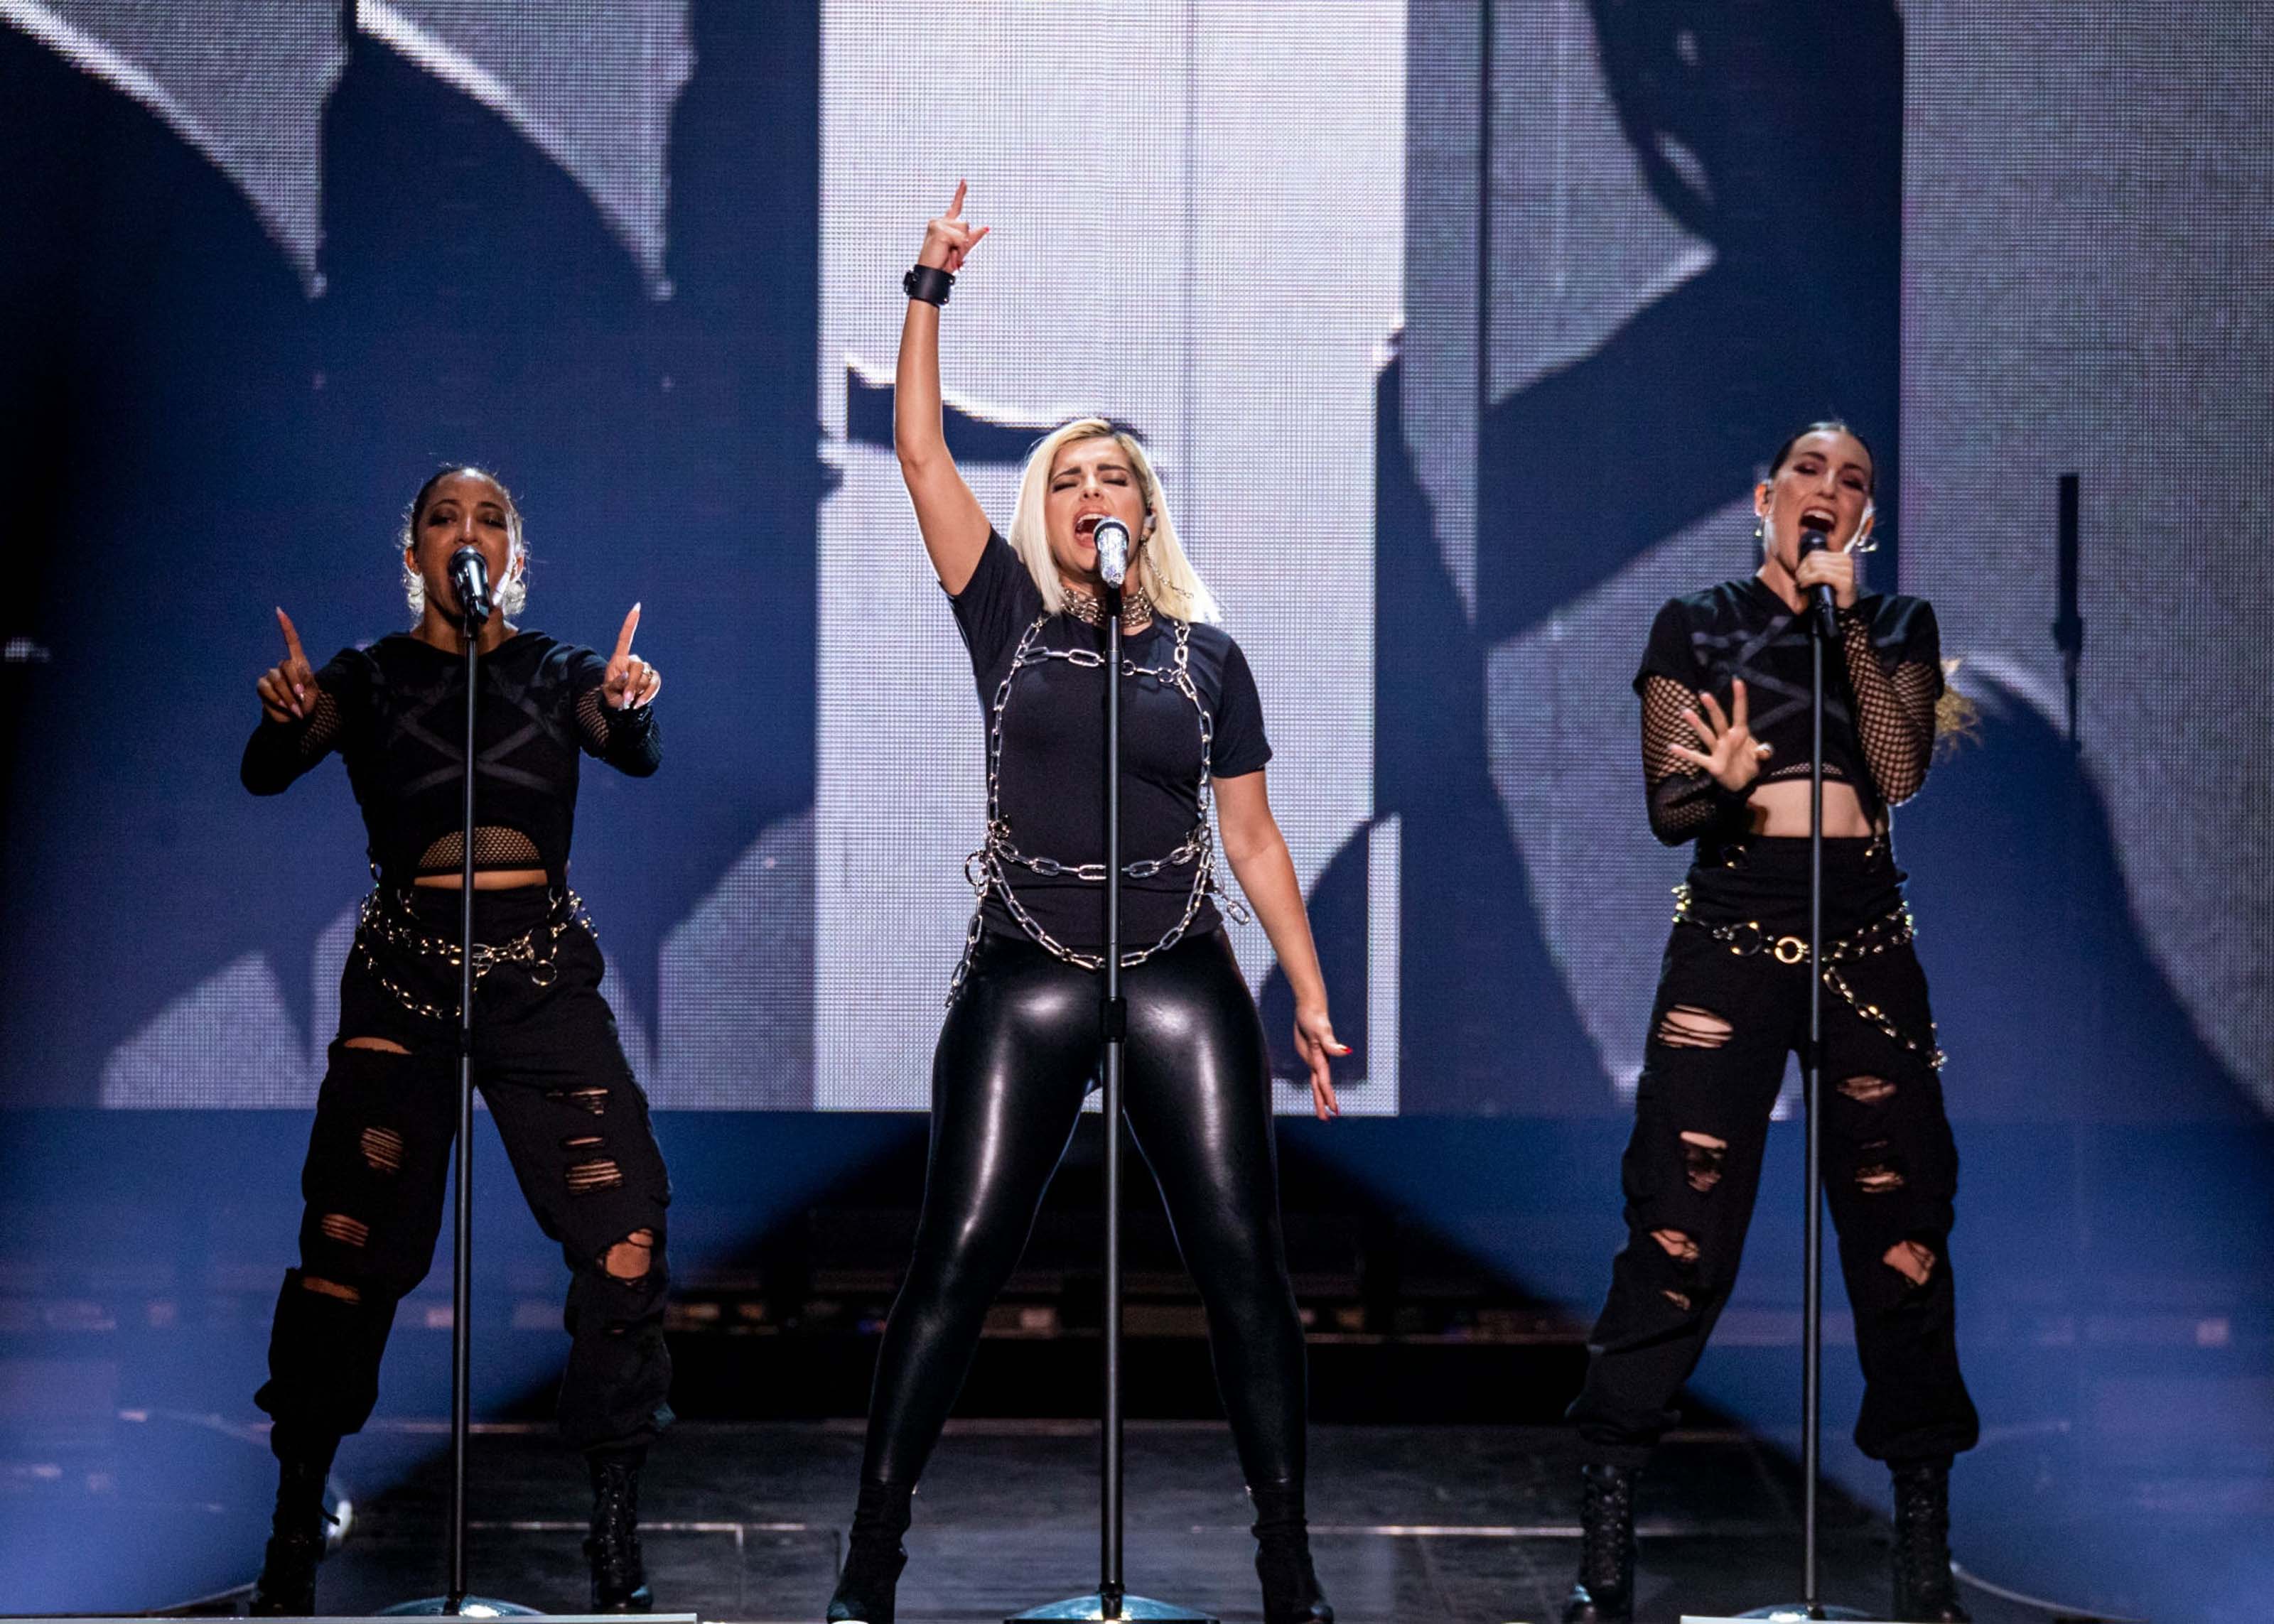 Bebe Rexha performs during The Jonas Brothers ‘Happiness Begins’ Tour